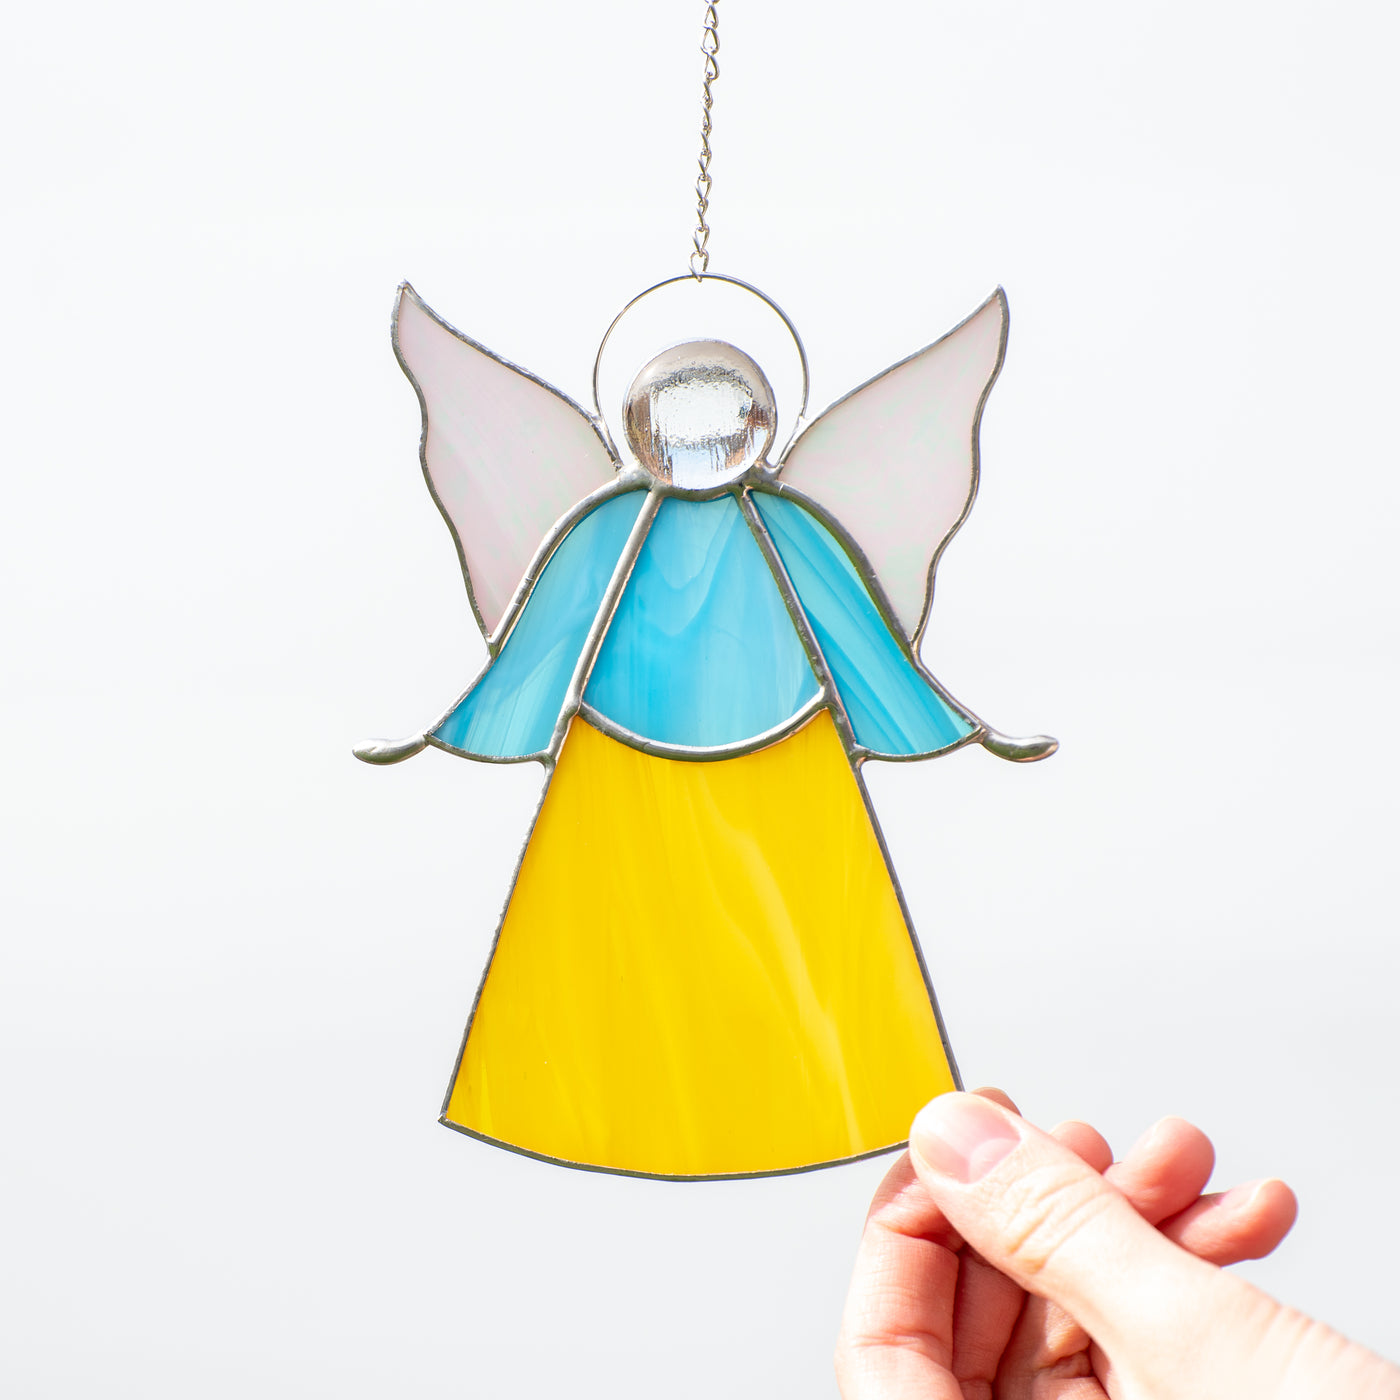 Stained glass blue and yellow angel window hanging 